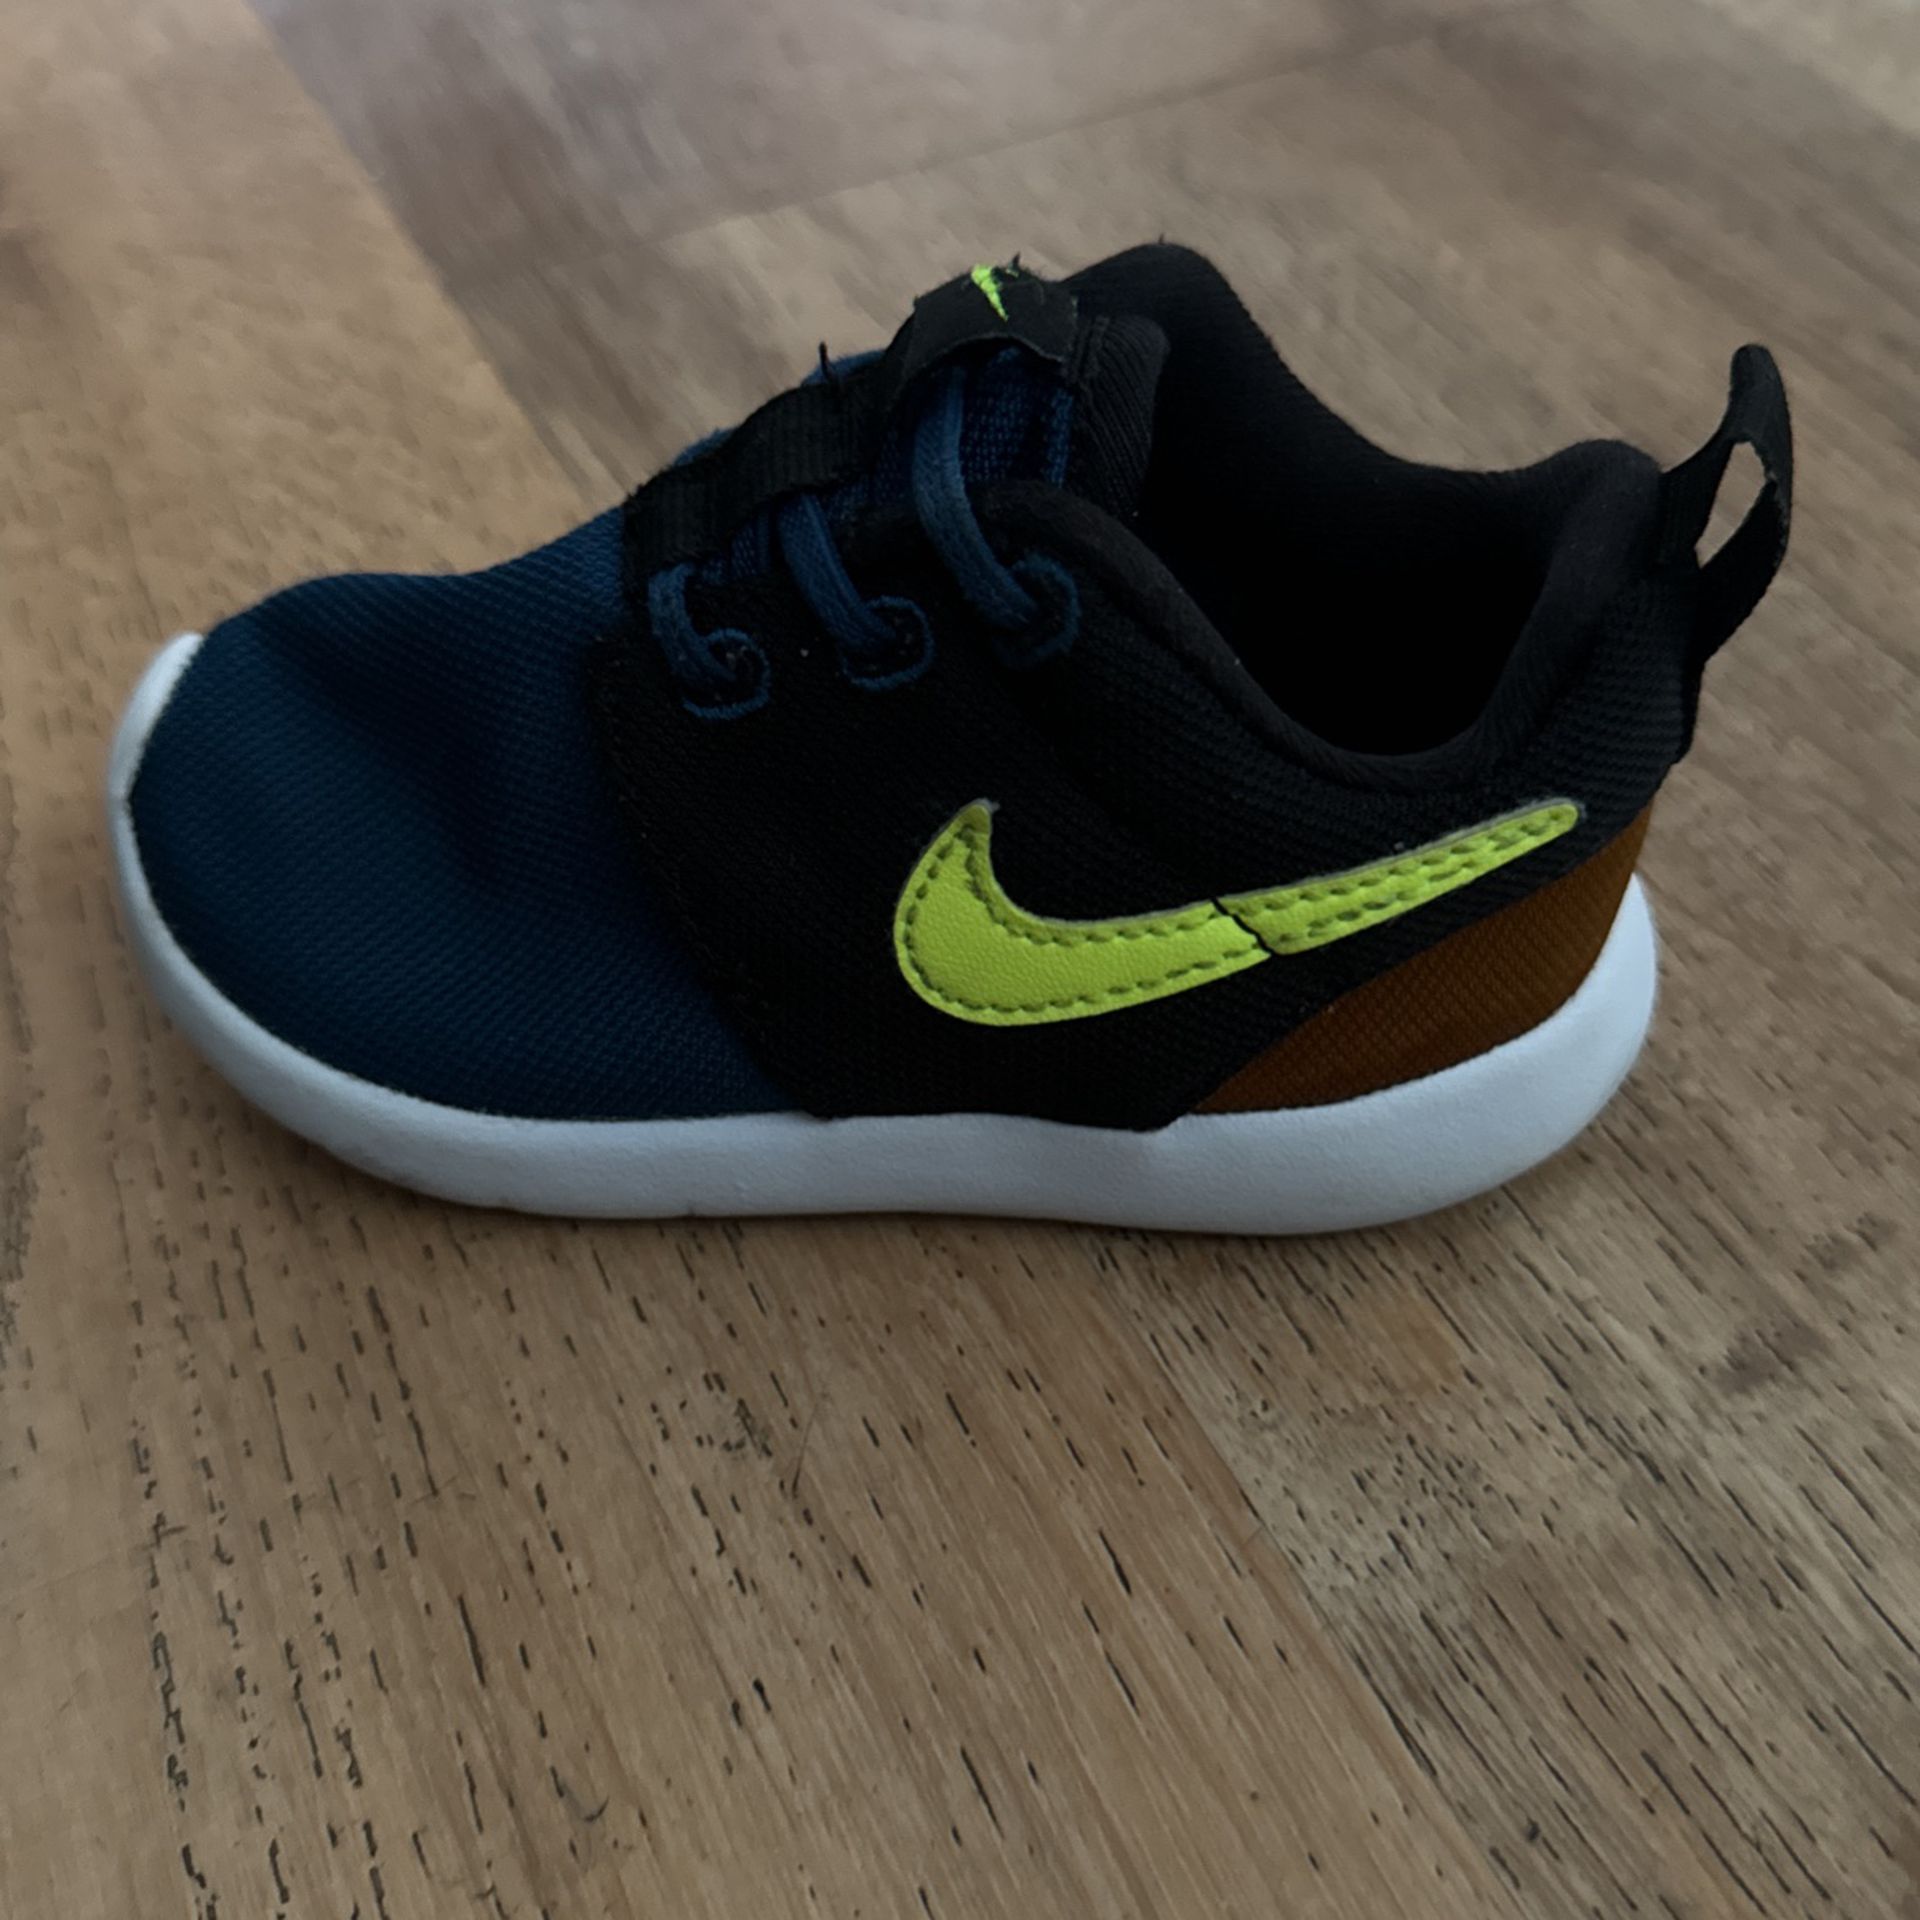 Nike Shoes Toddler Size 6